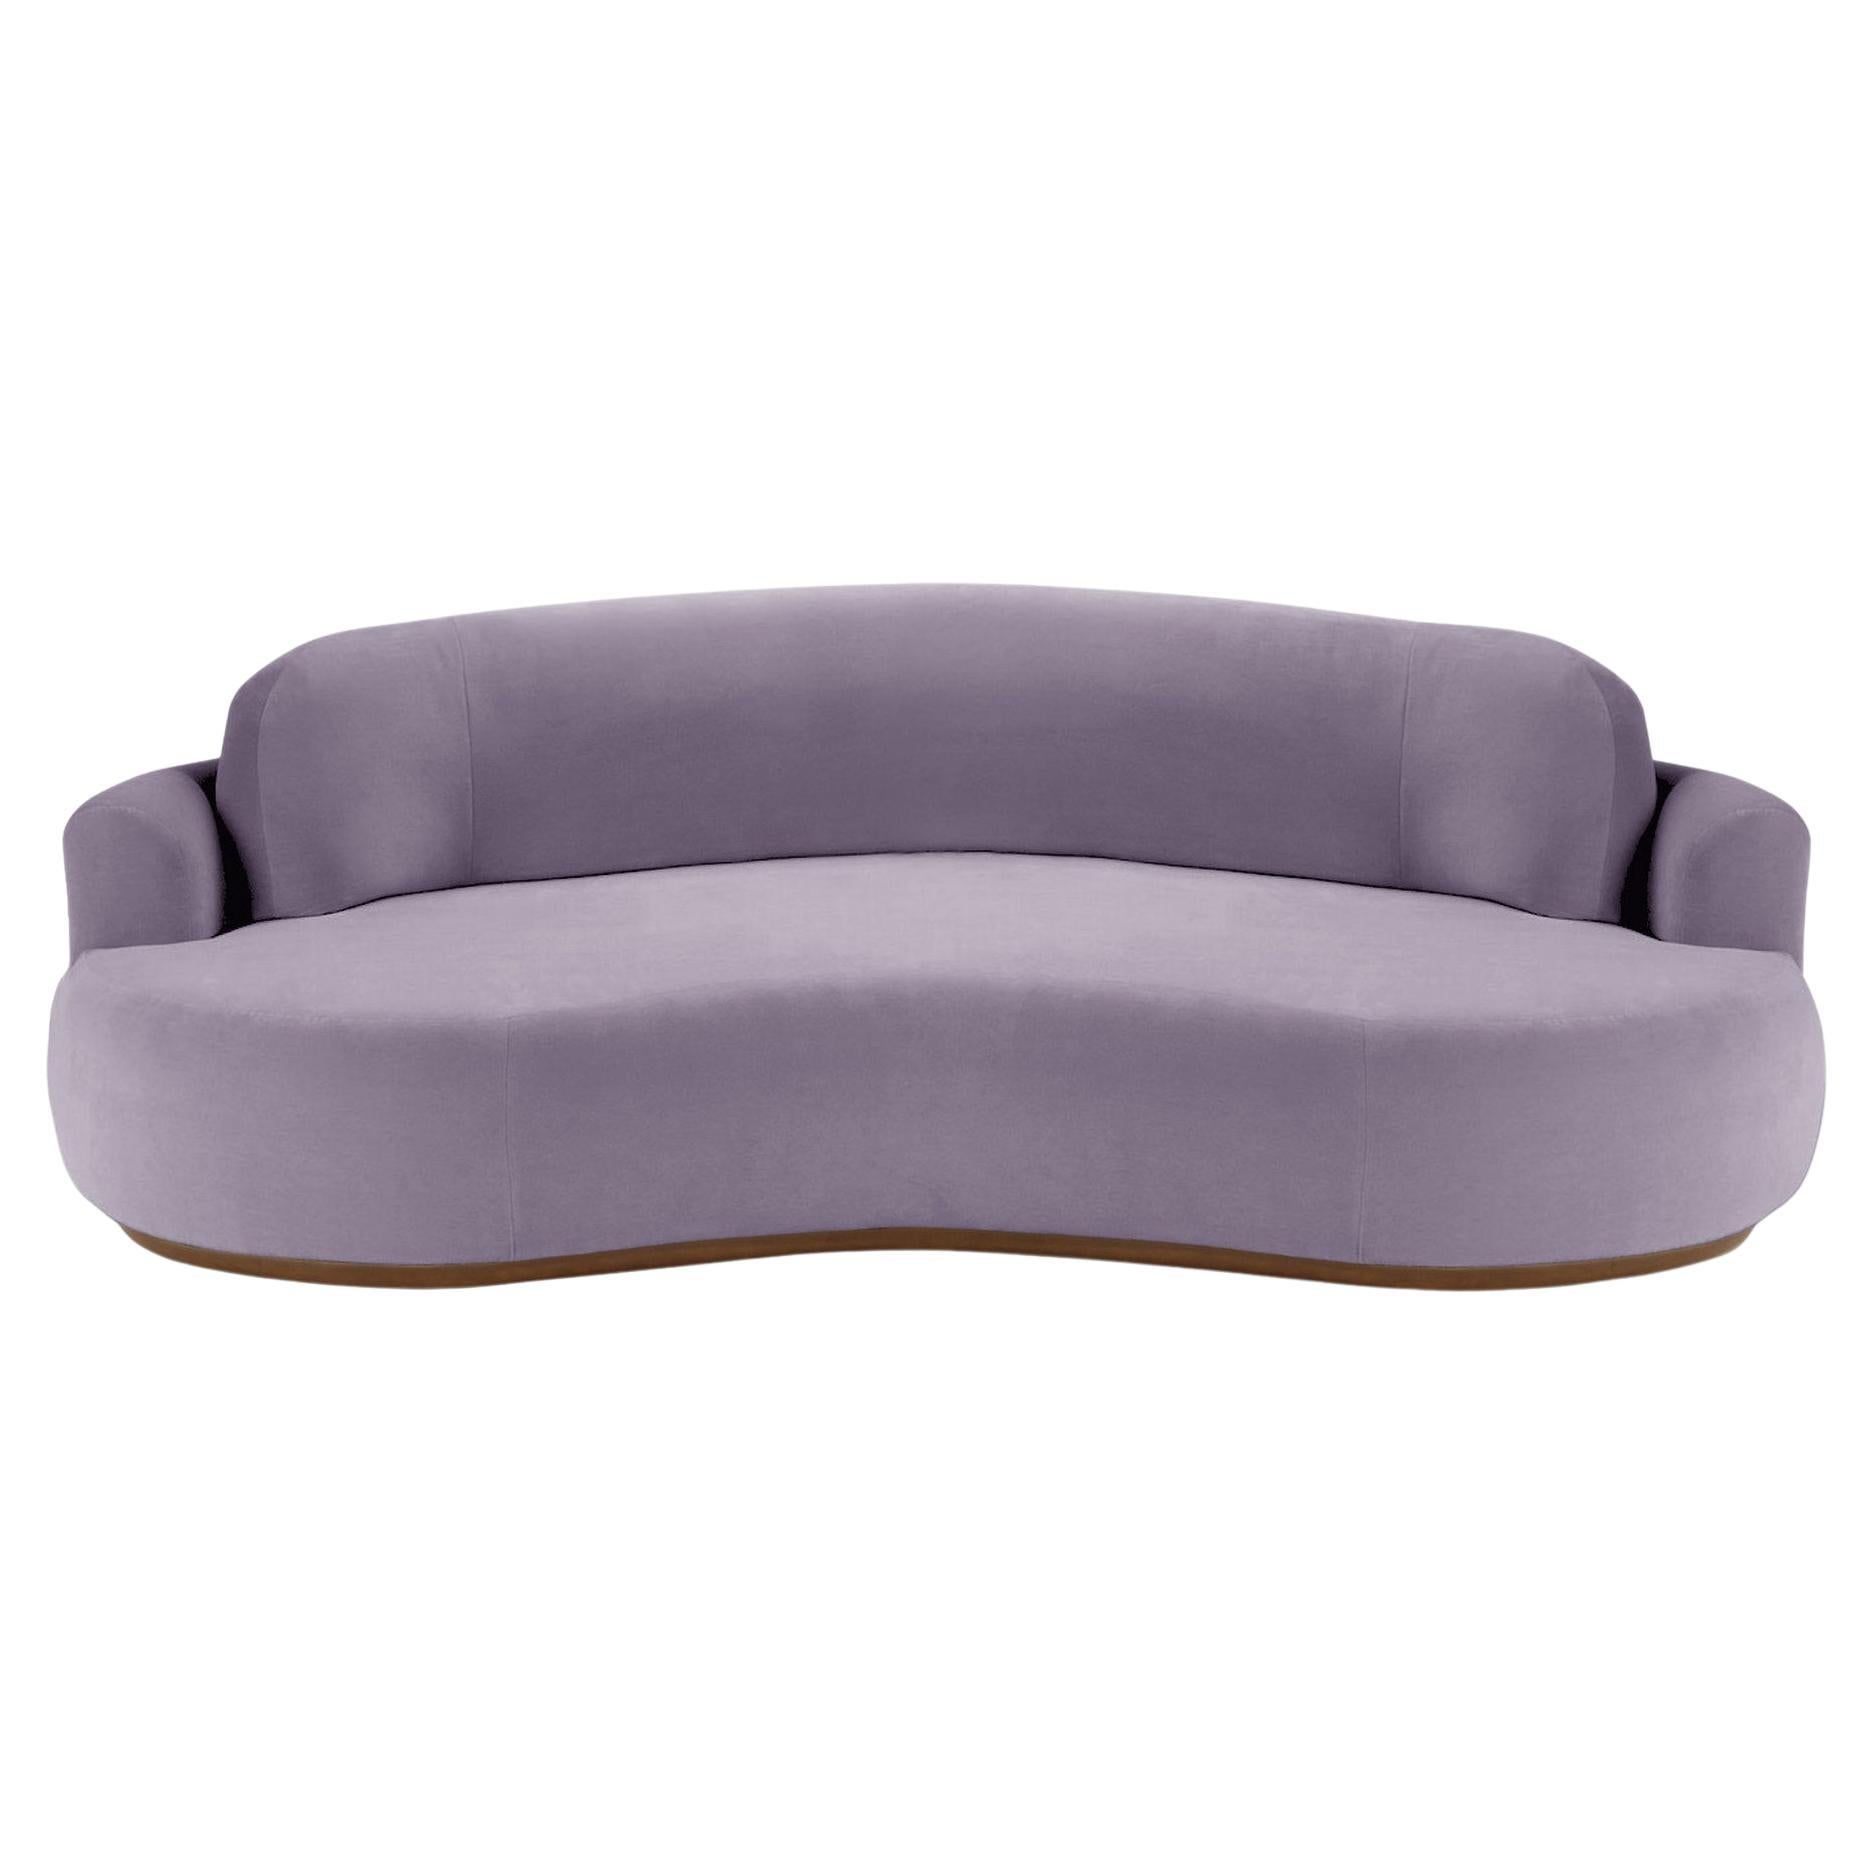 Naked Curved Sofa, Small with Beech Ash-056-1 and Paris Lavanda